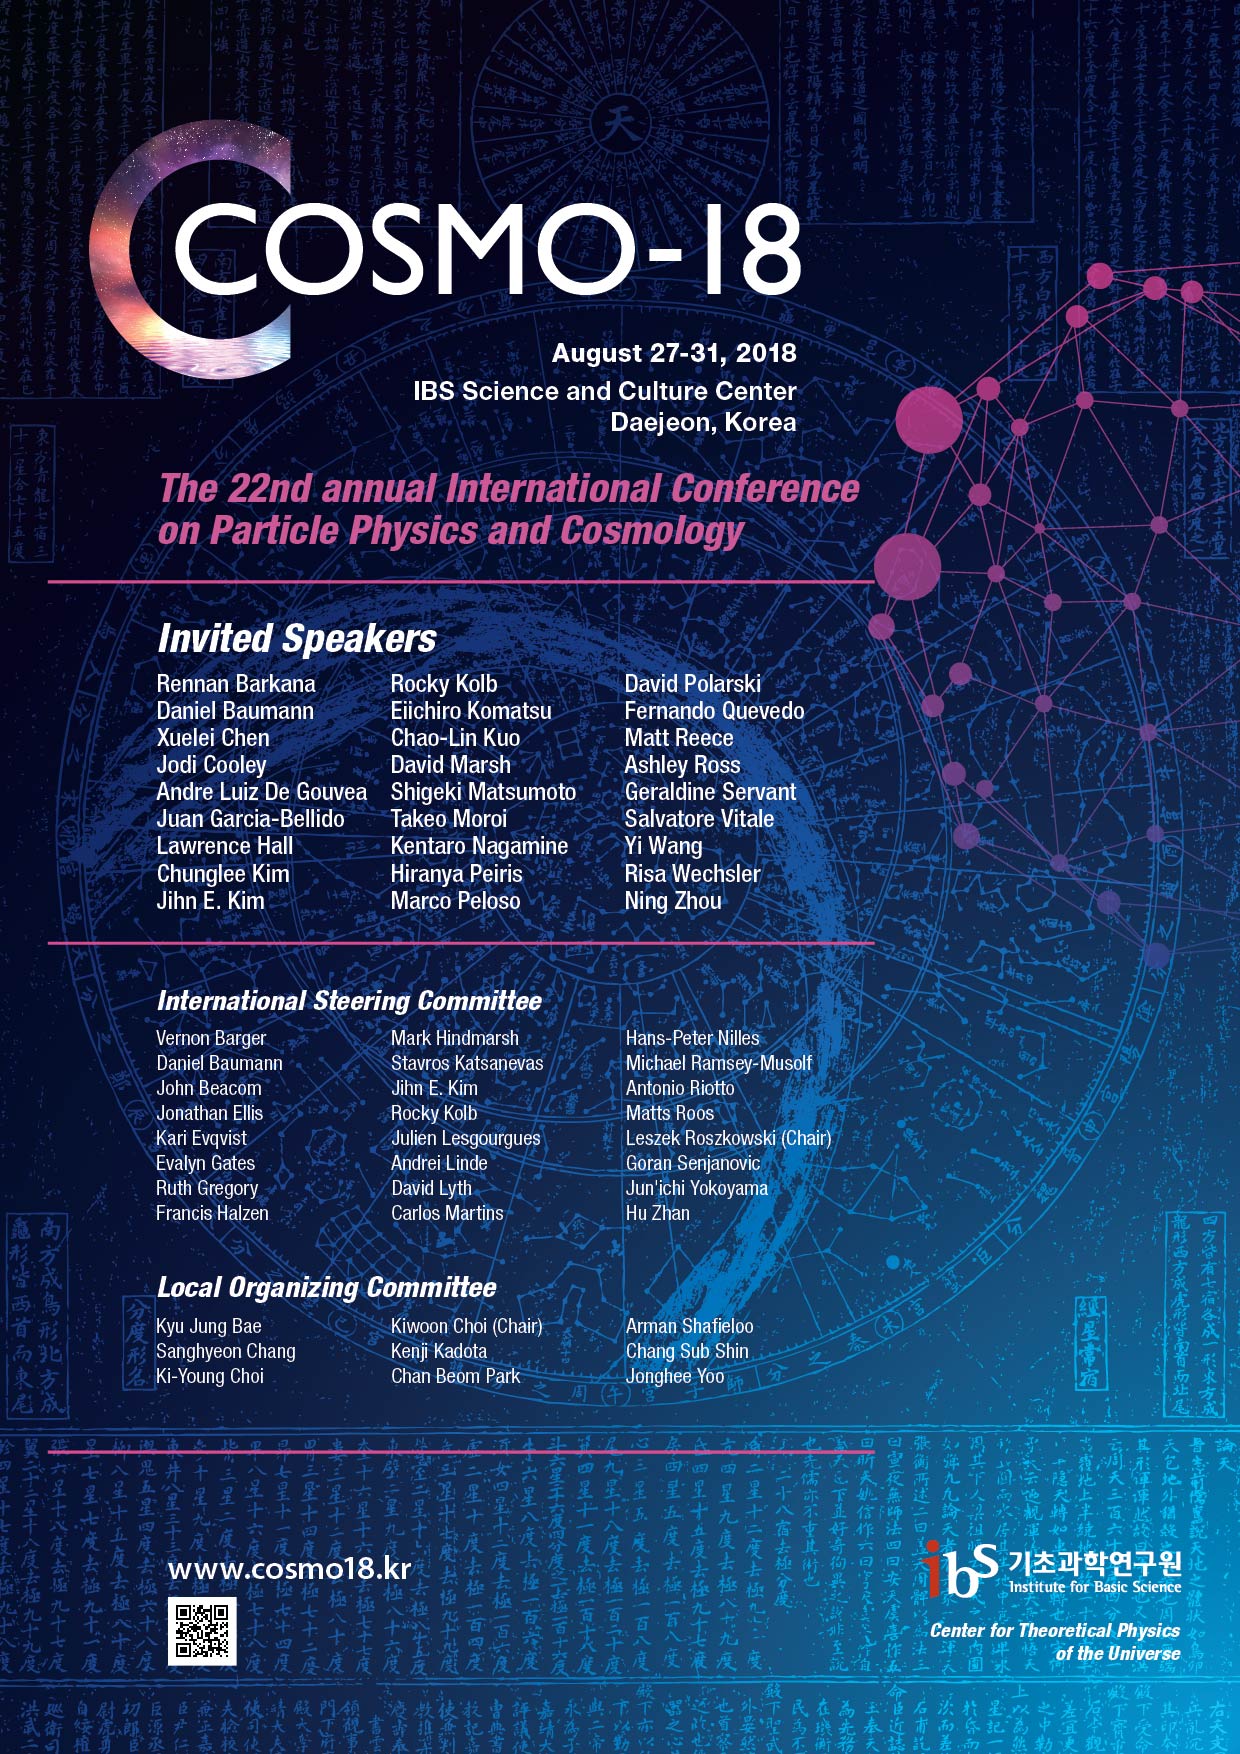 [Conference] The 22nd annual international Conference on Particle Physics and Cosmology (COSMO-18)  (Aug 27-31, 2018) 사진